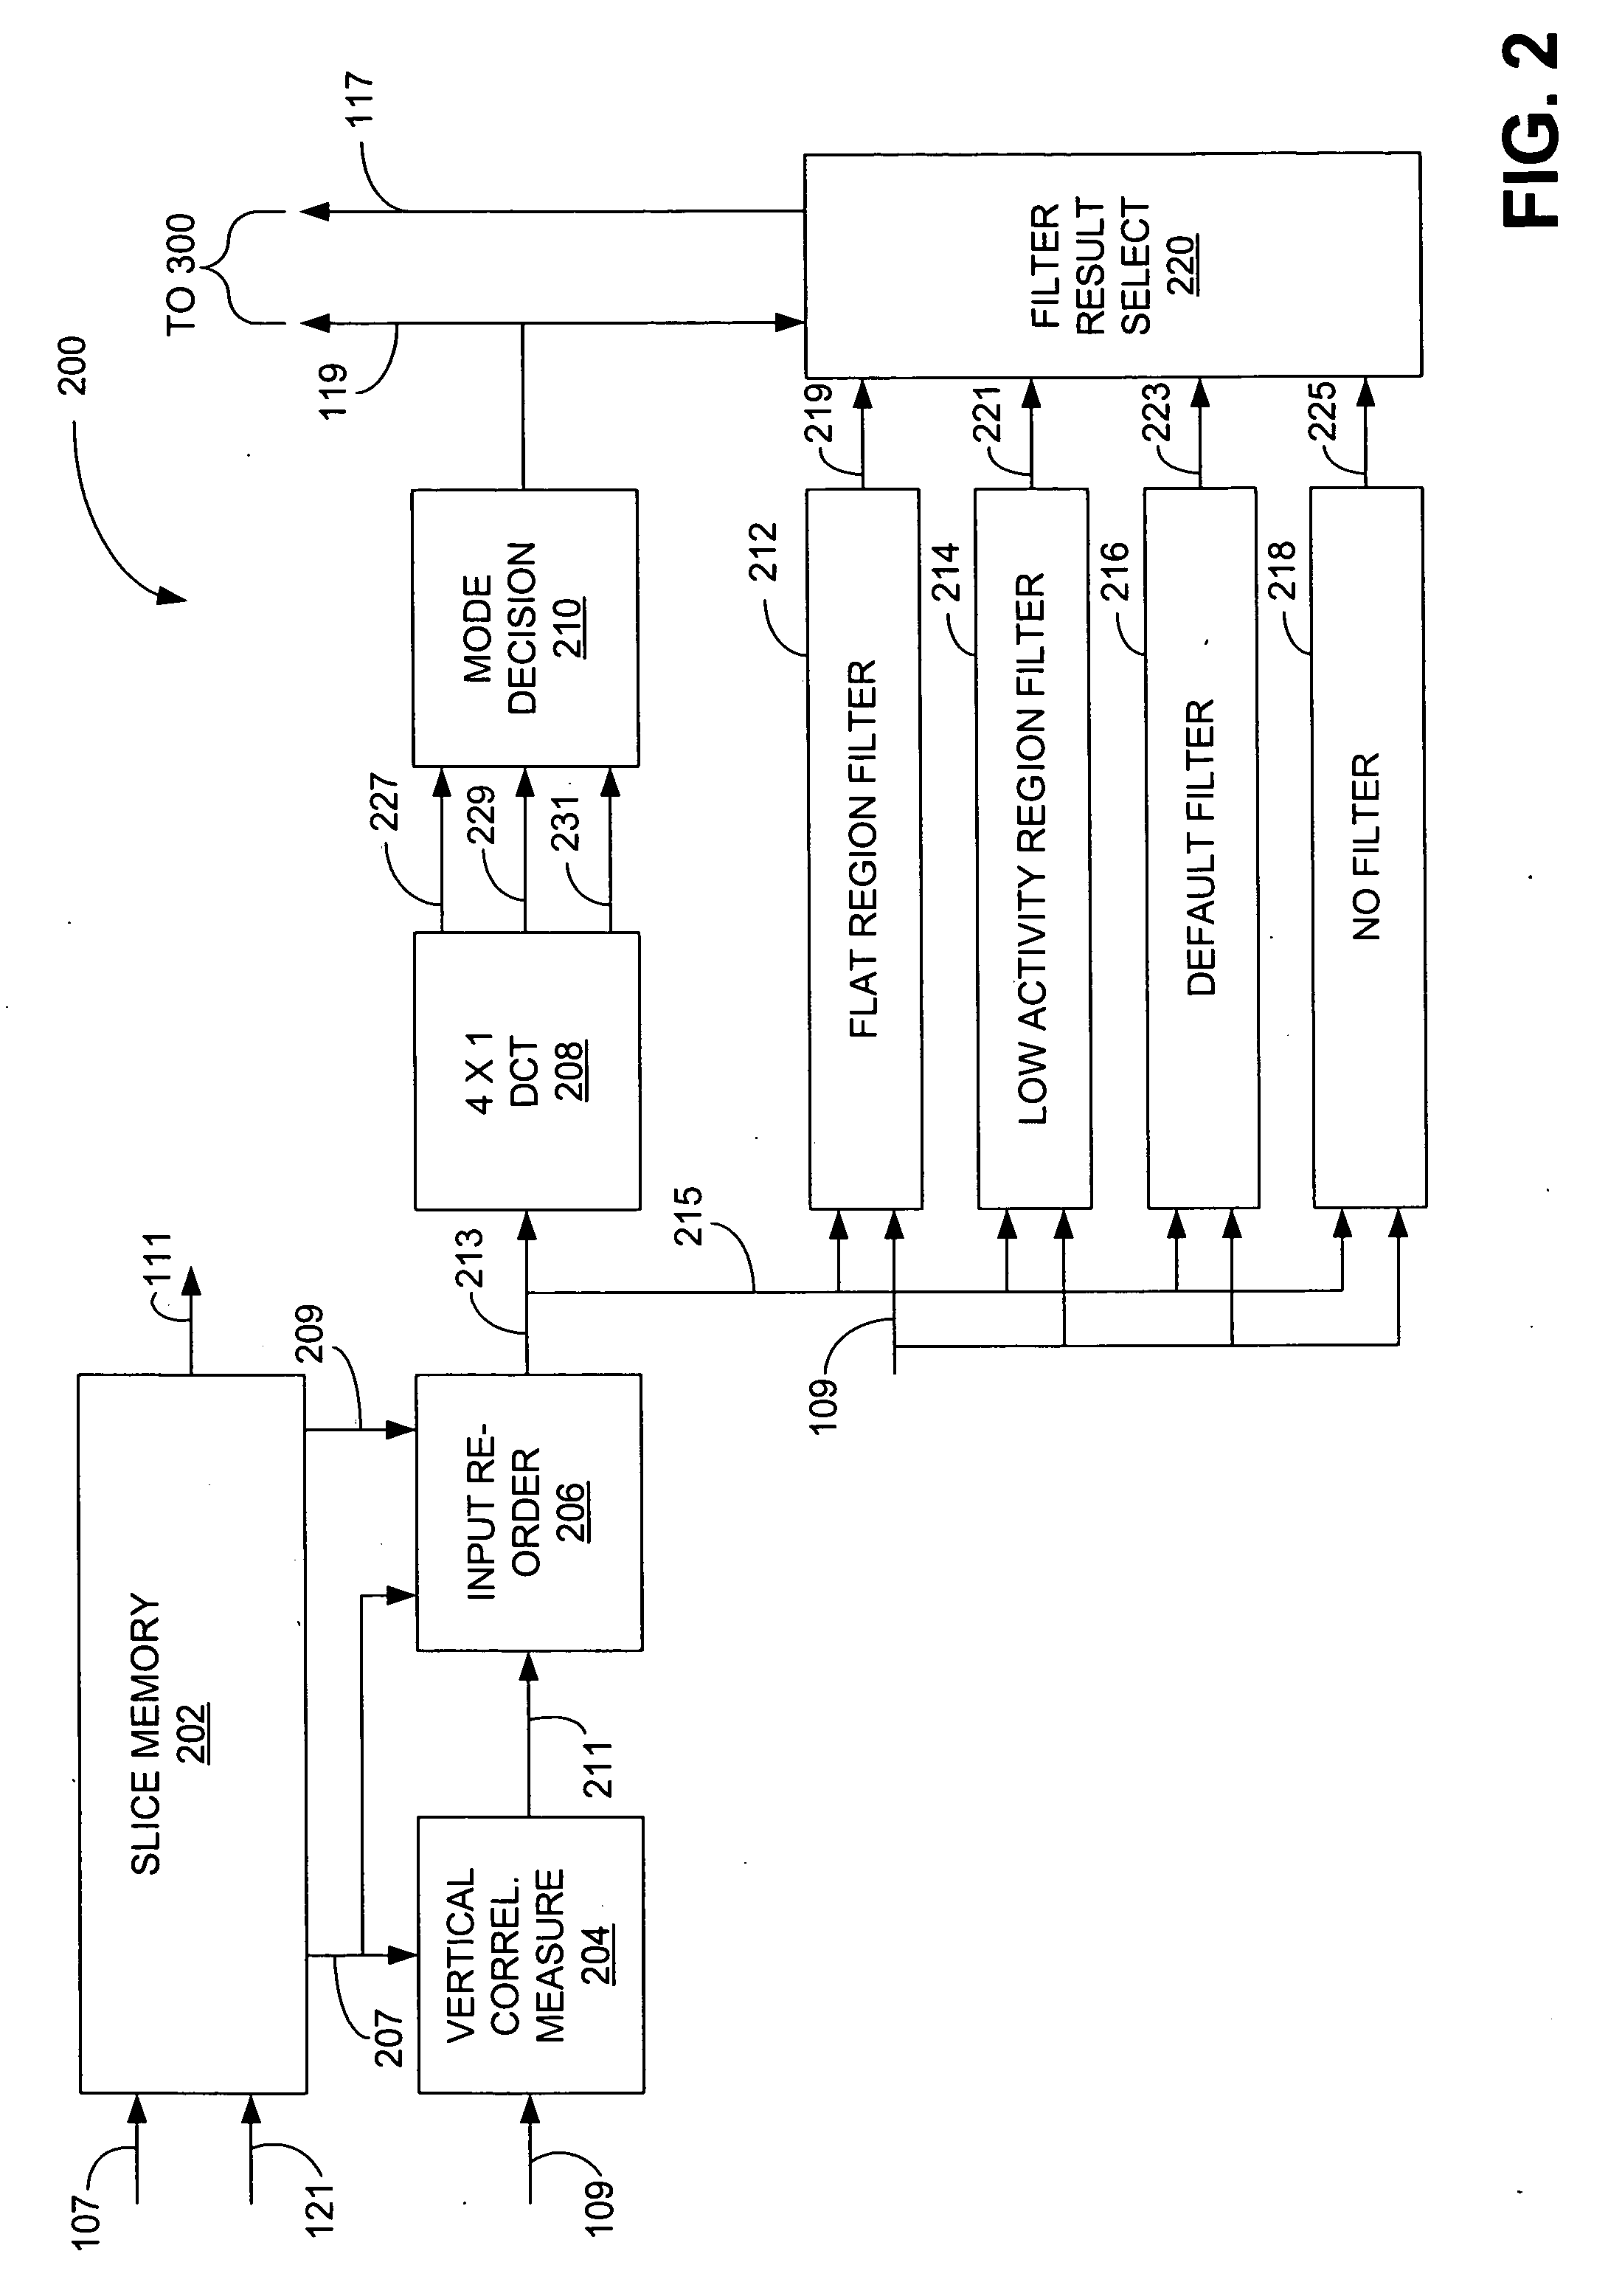 De-blocking and de-ringing systems and methods